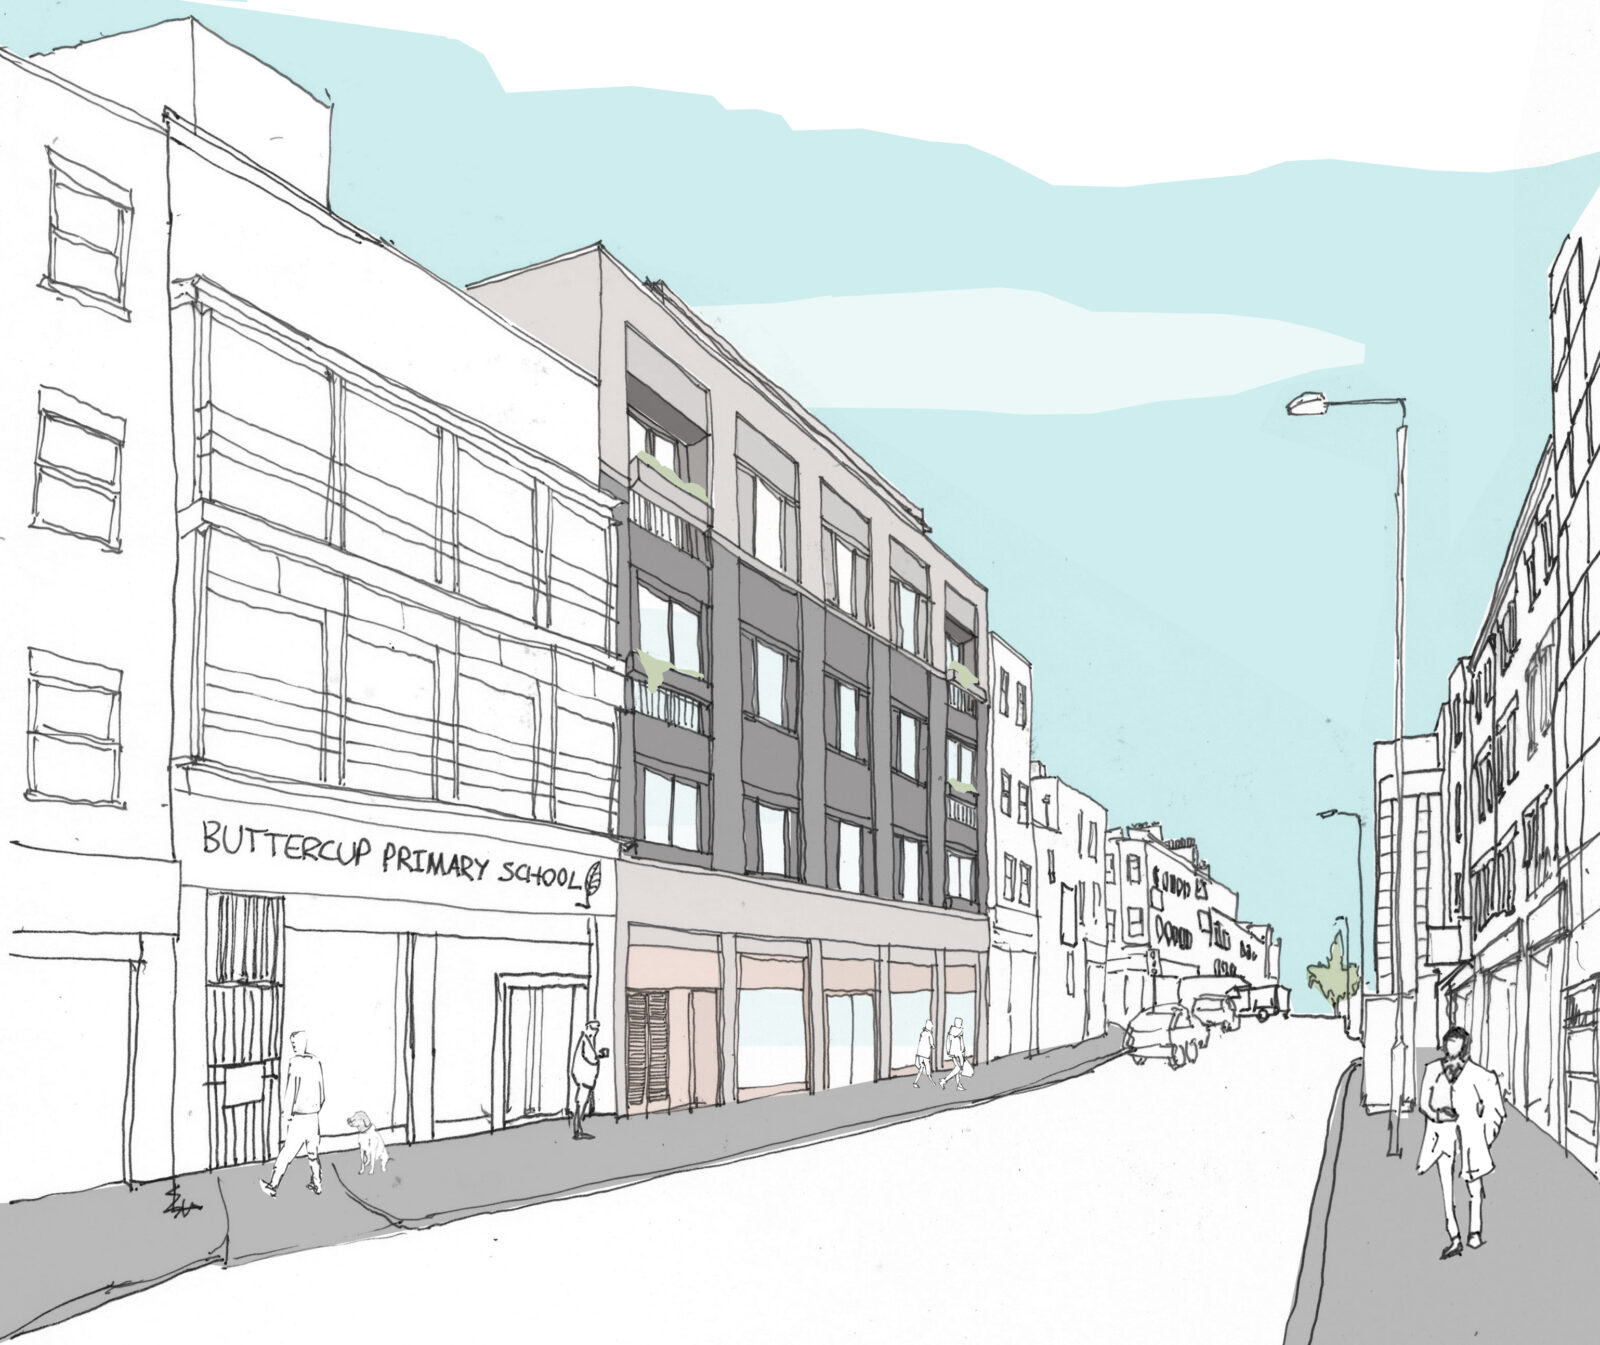 Sketch visual showing proposed development from street